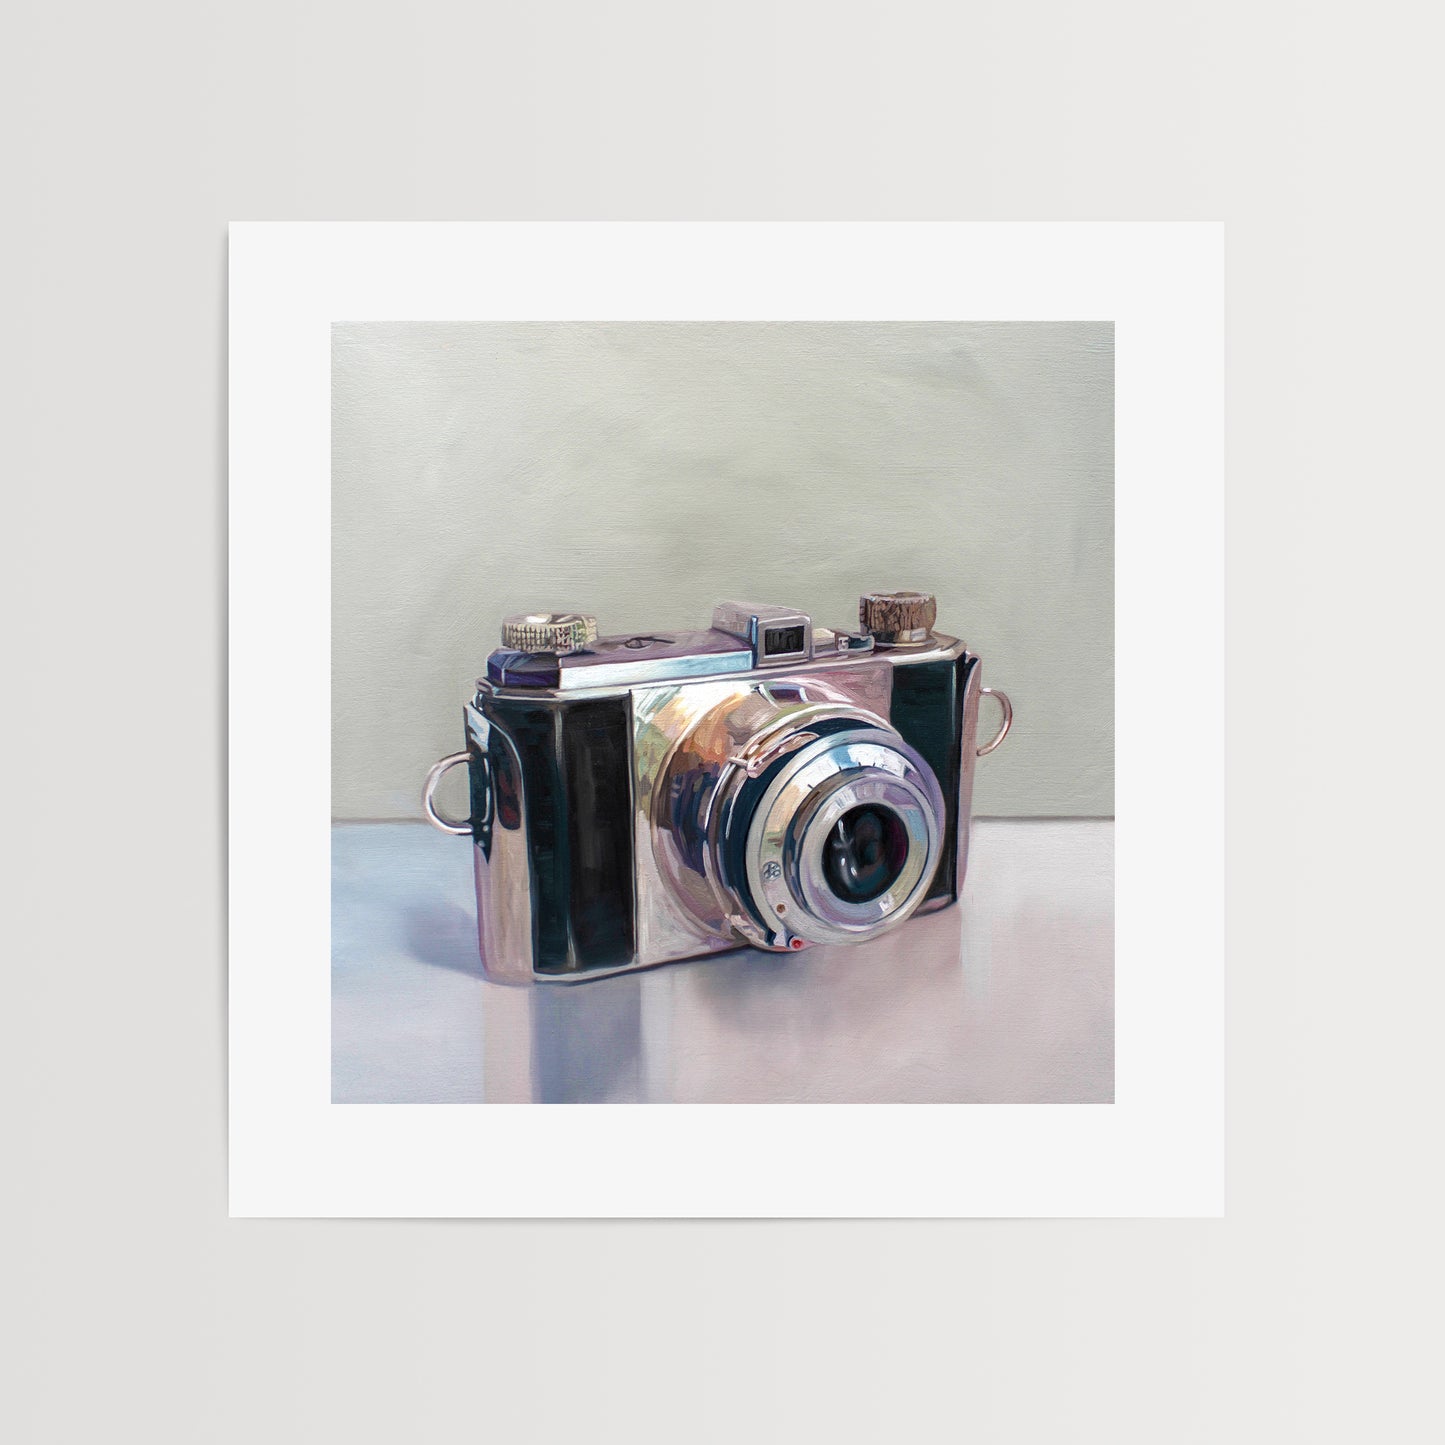 This artwork features a vintage 35mm film camera painted in loose painterly brushstrokes.